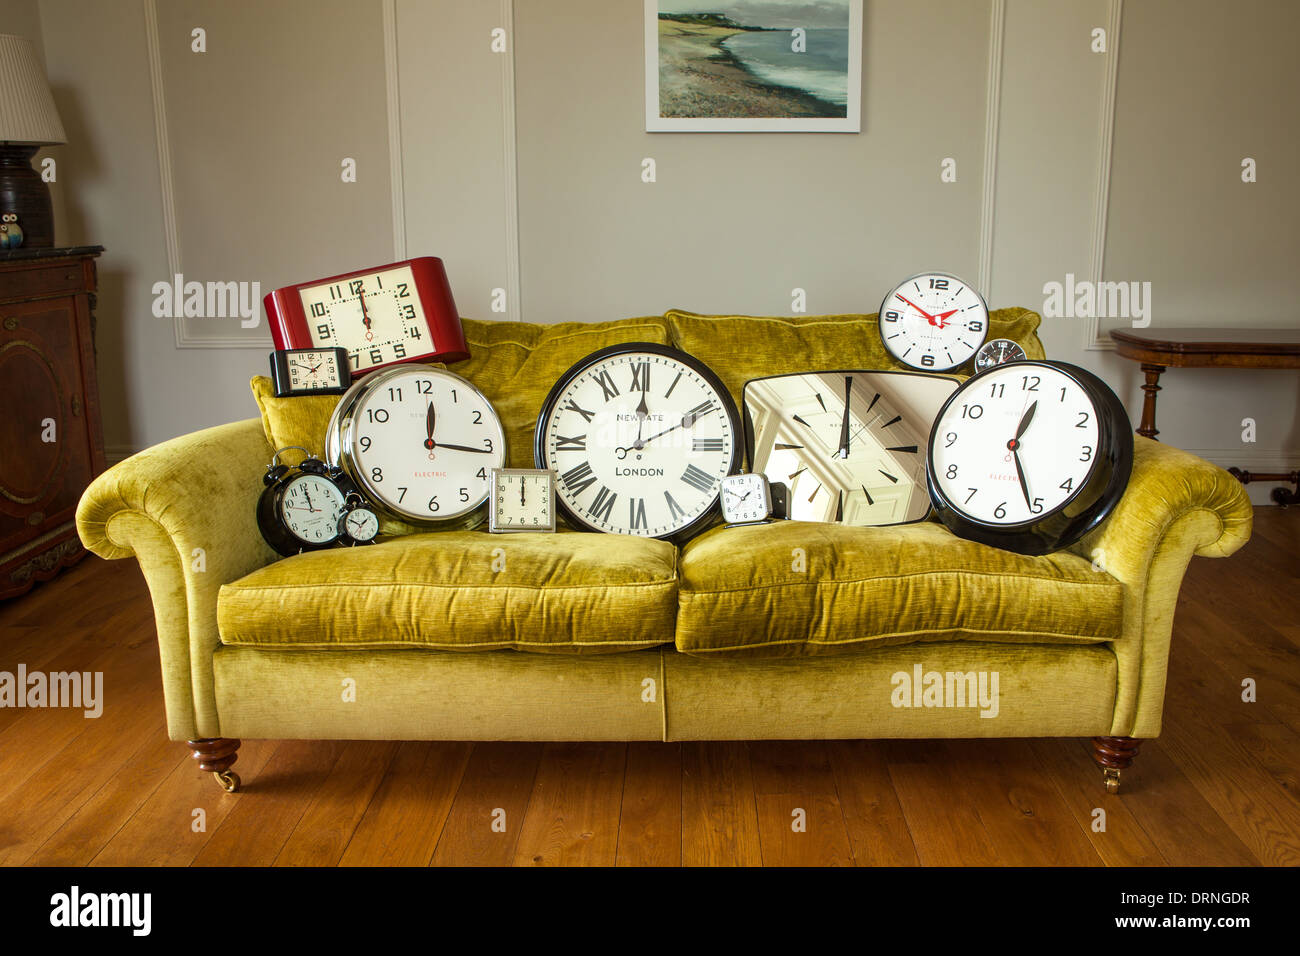 clocks set up on a sofa in a home Stock Photo